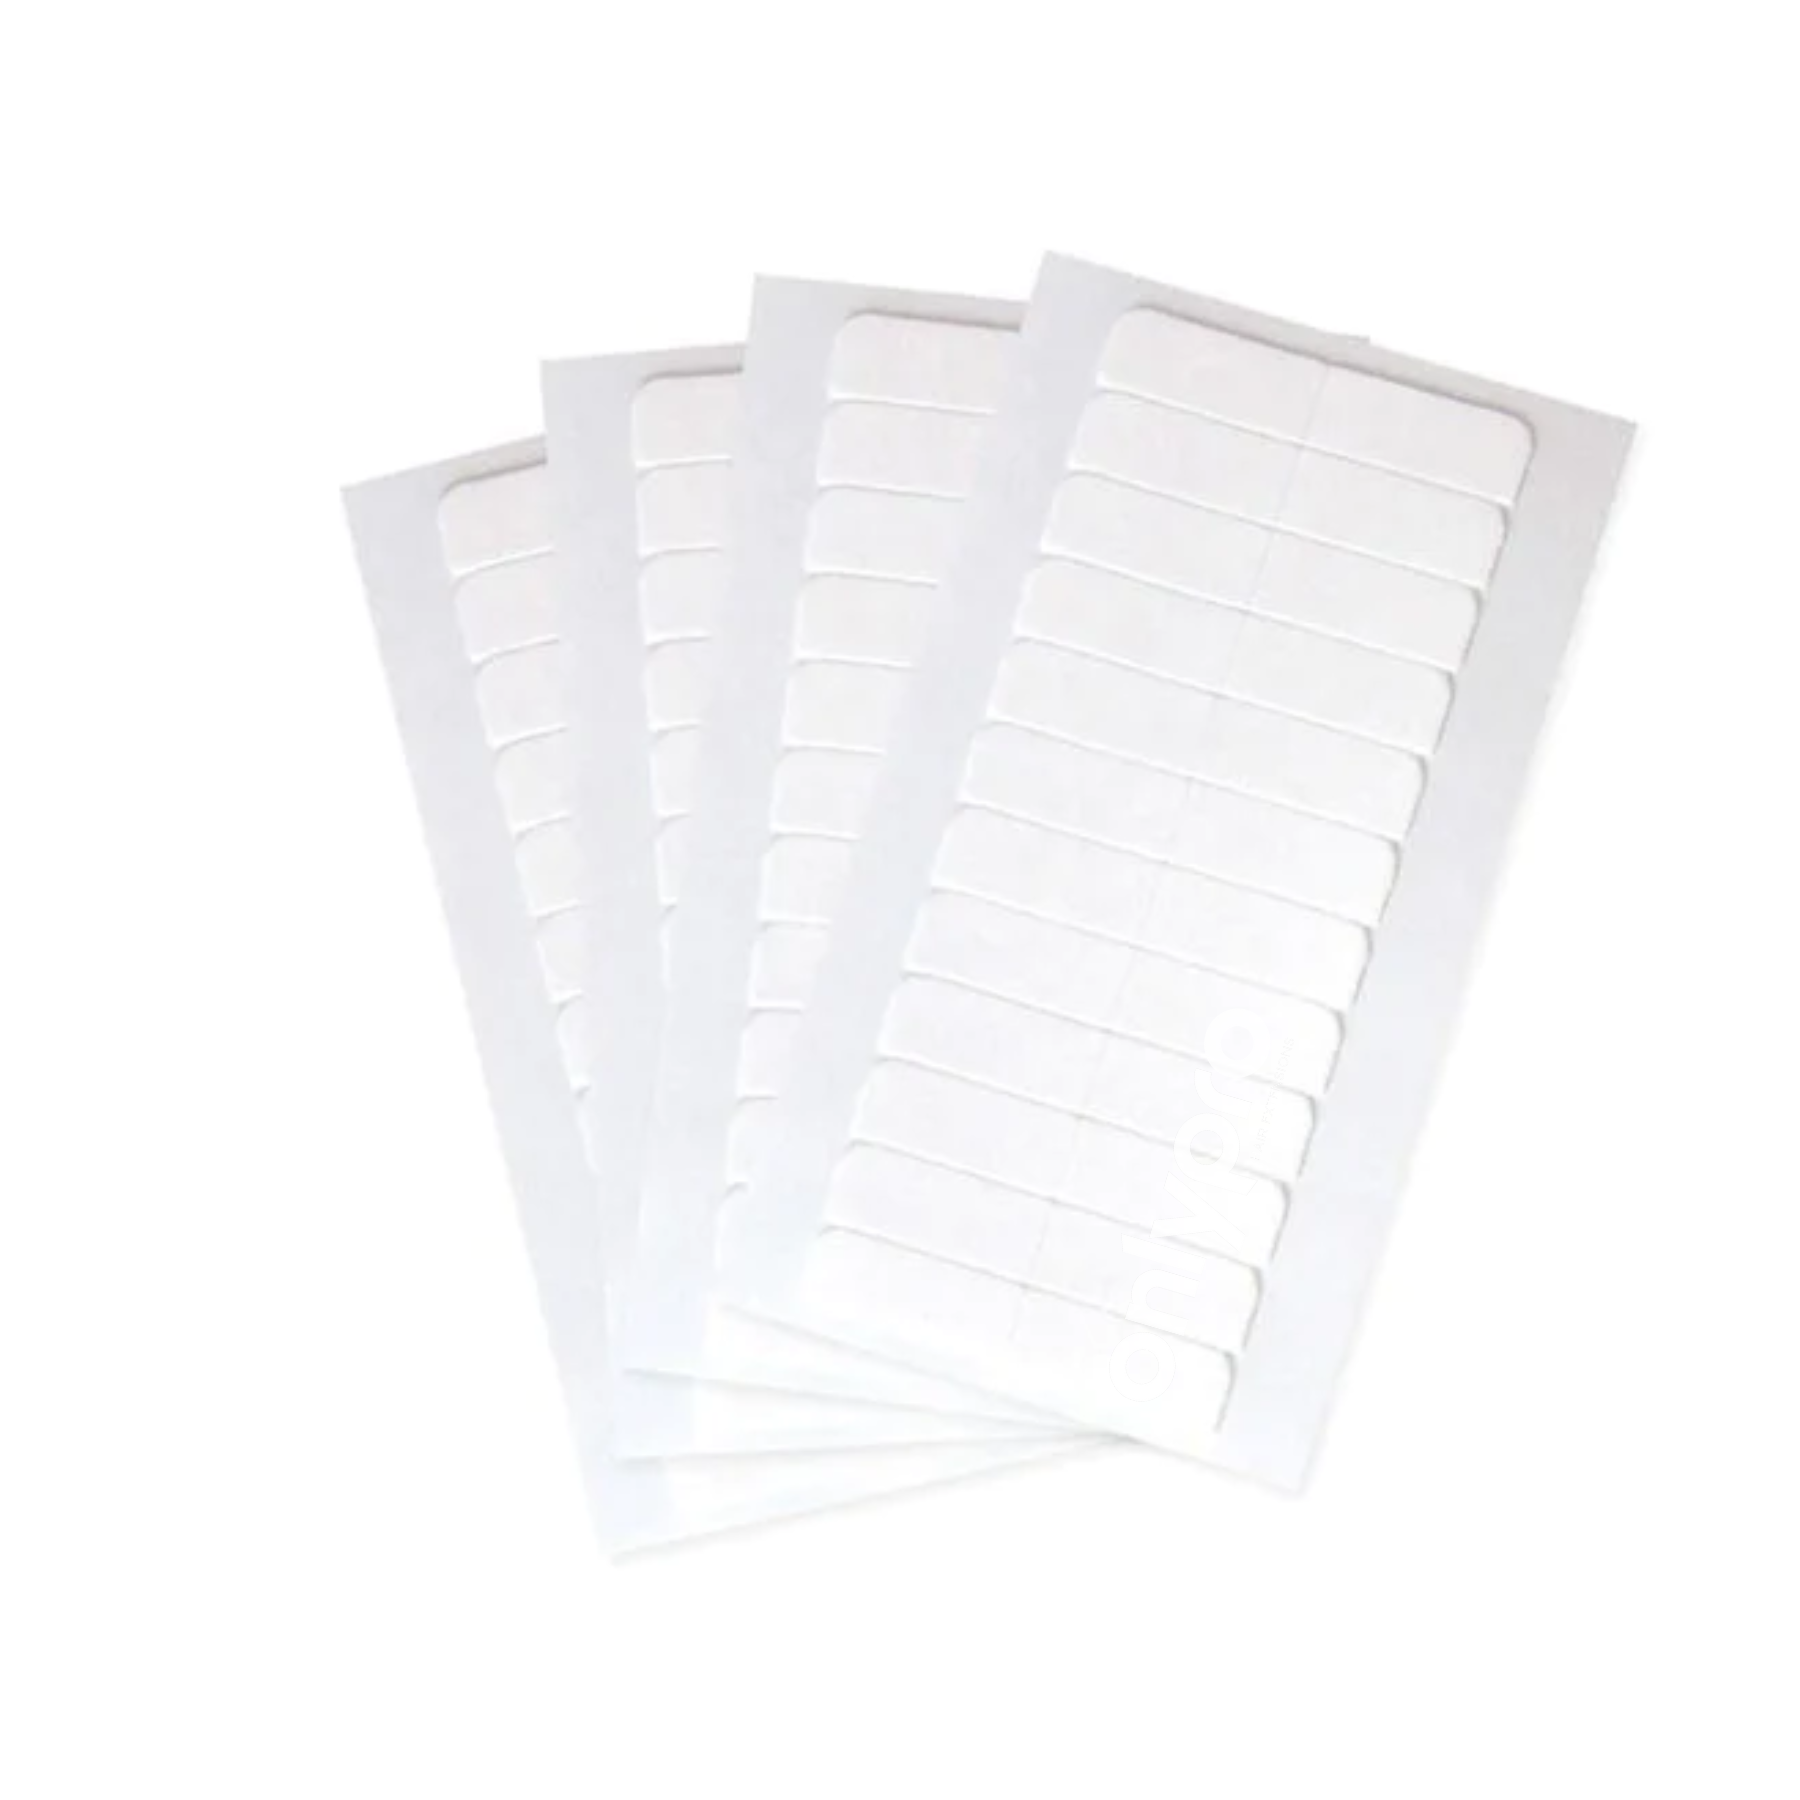 Pro White Replacement Tape Tabs (120)